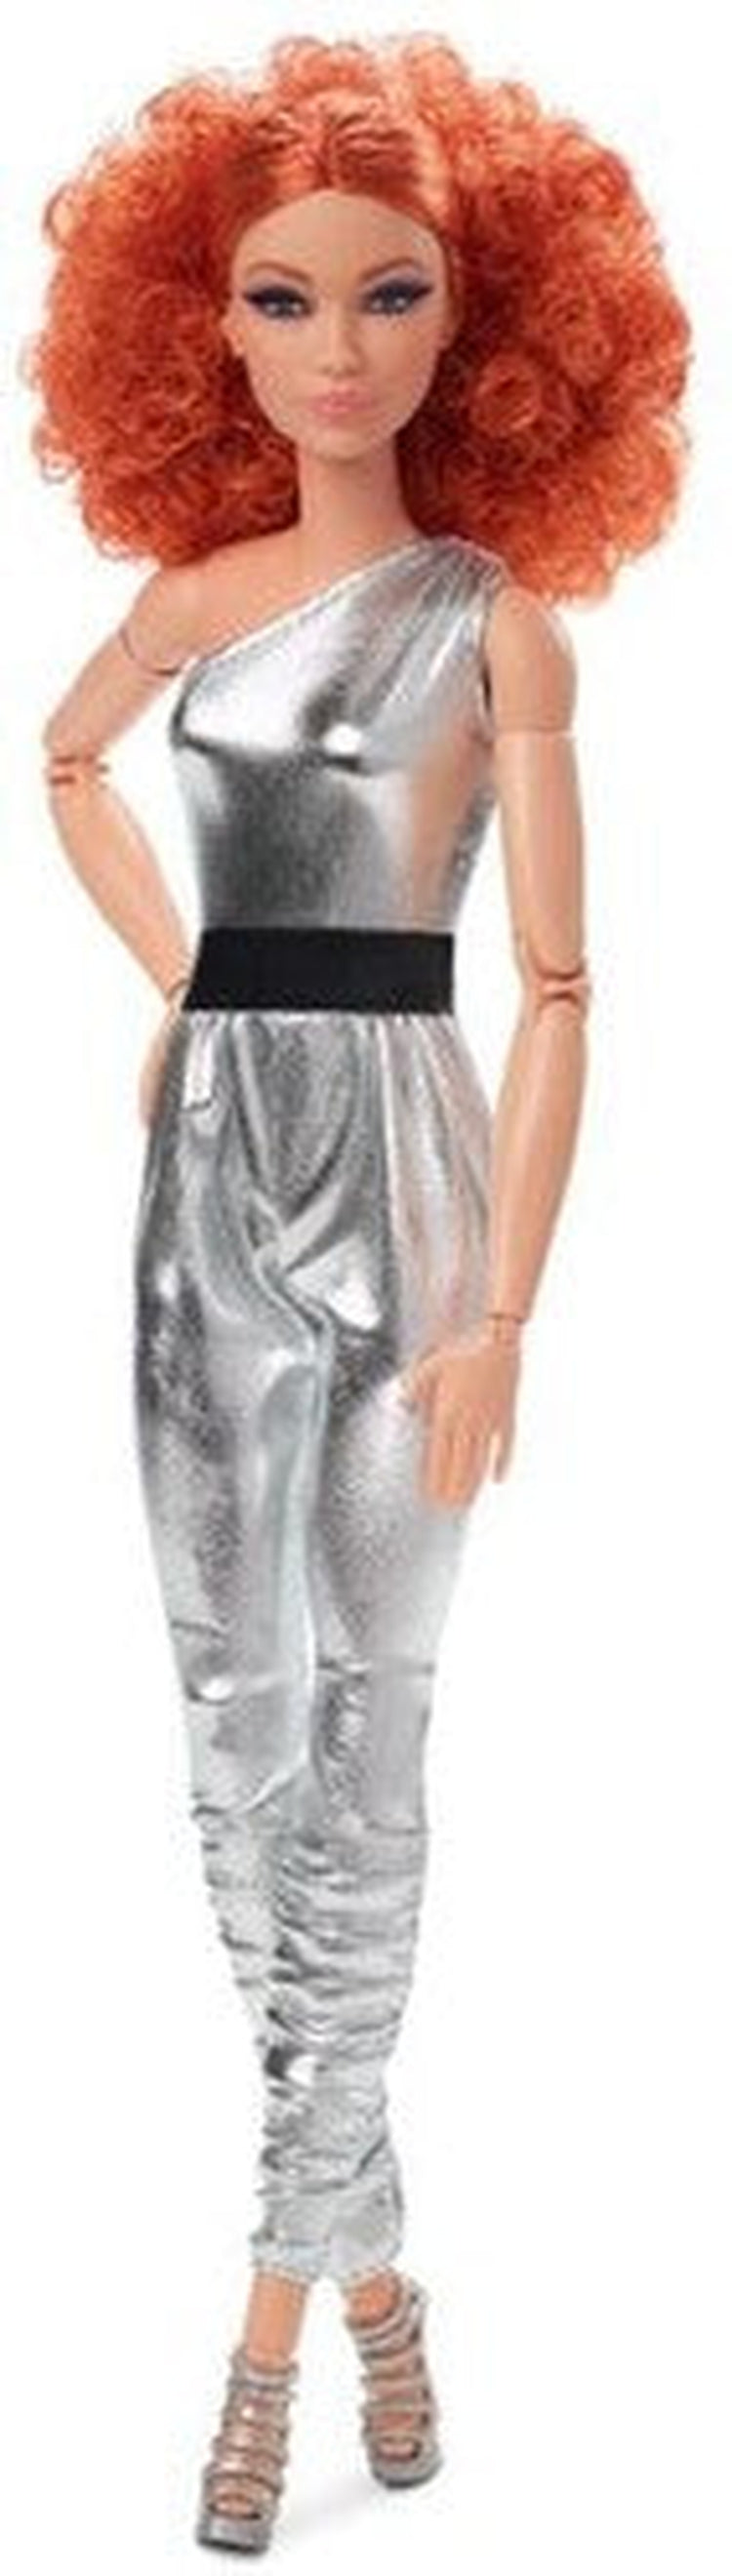 Mattel - Barbie Looks Doll with Silver Jumper and Curly Red Hair